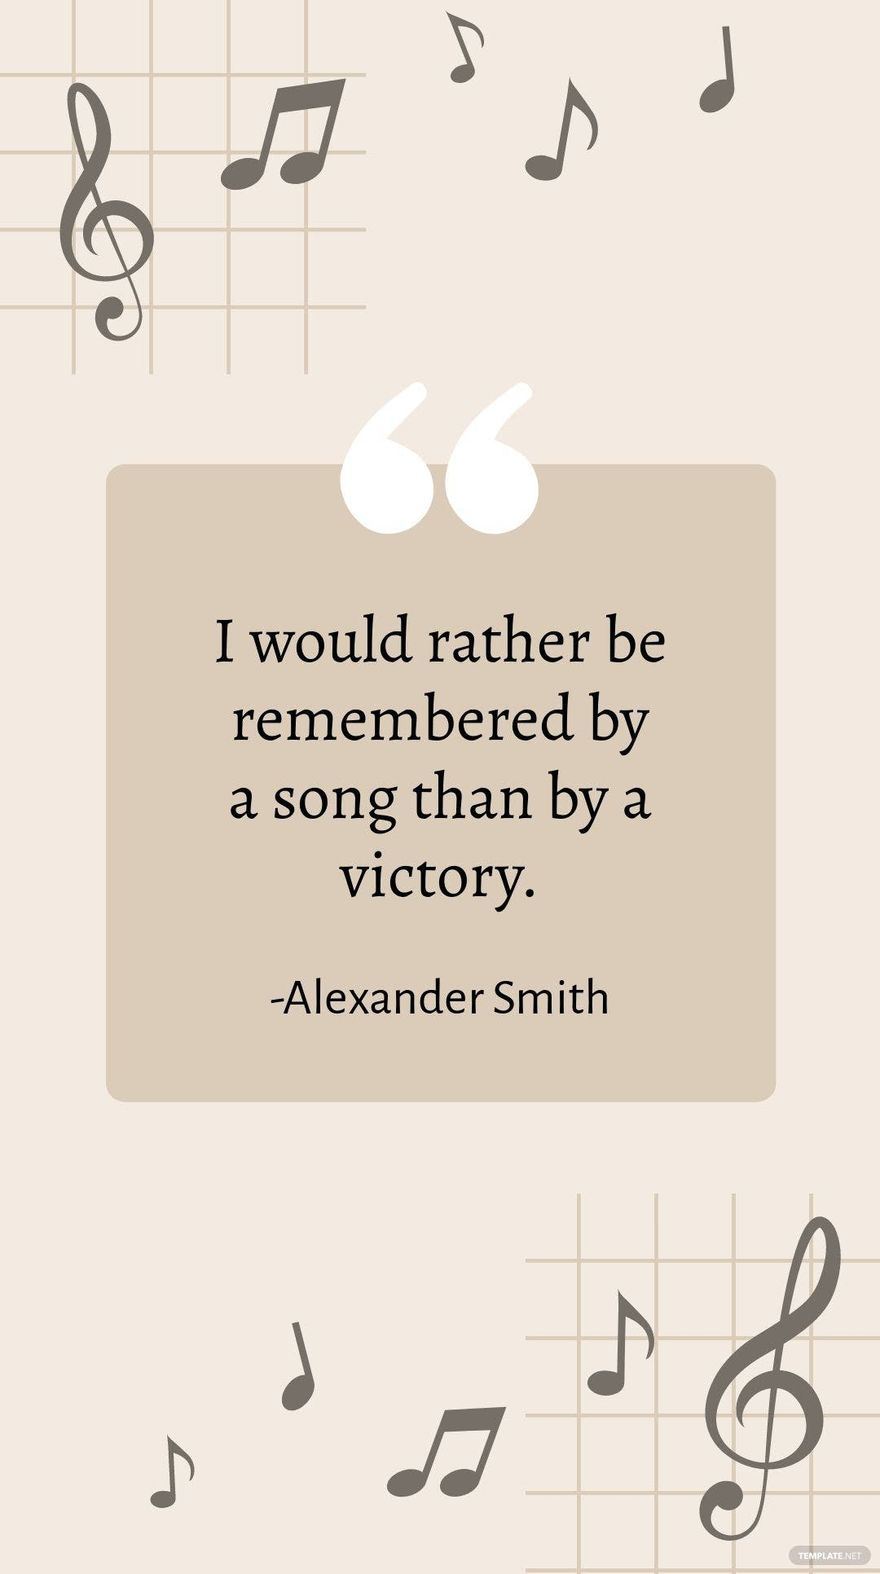 Alexander Smith - I would rather be remembered by a song than by a victory. in JPG